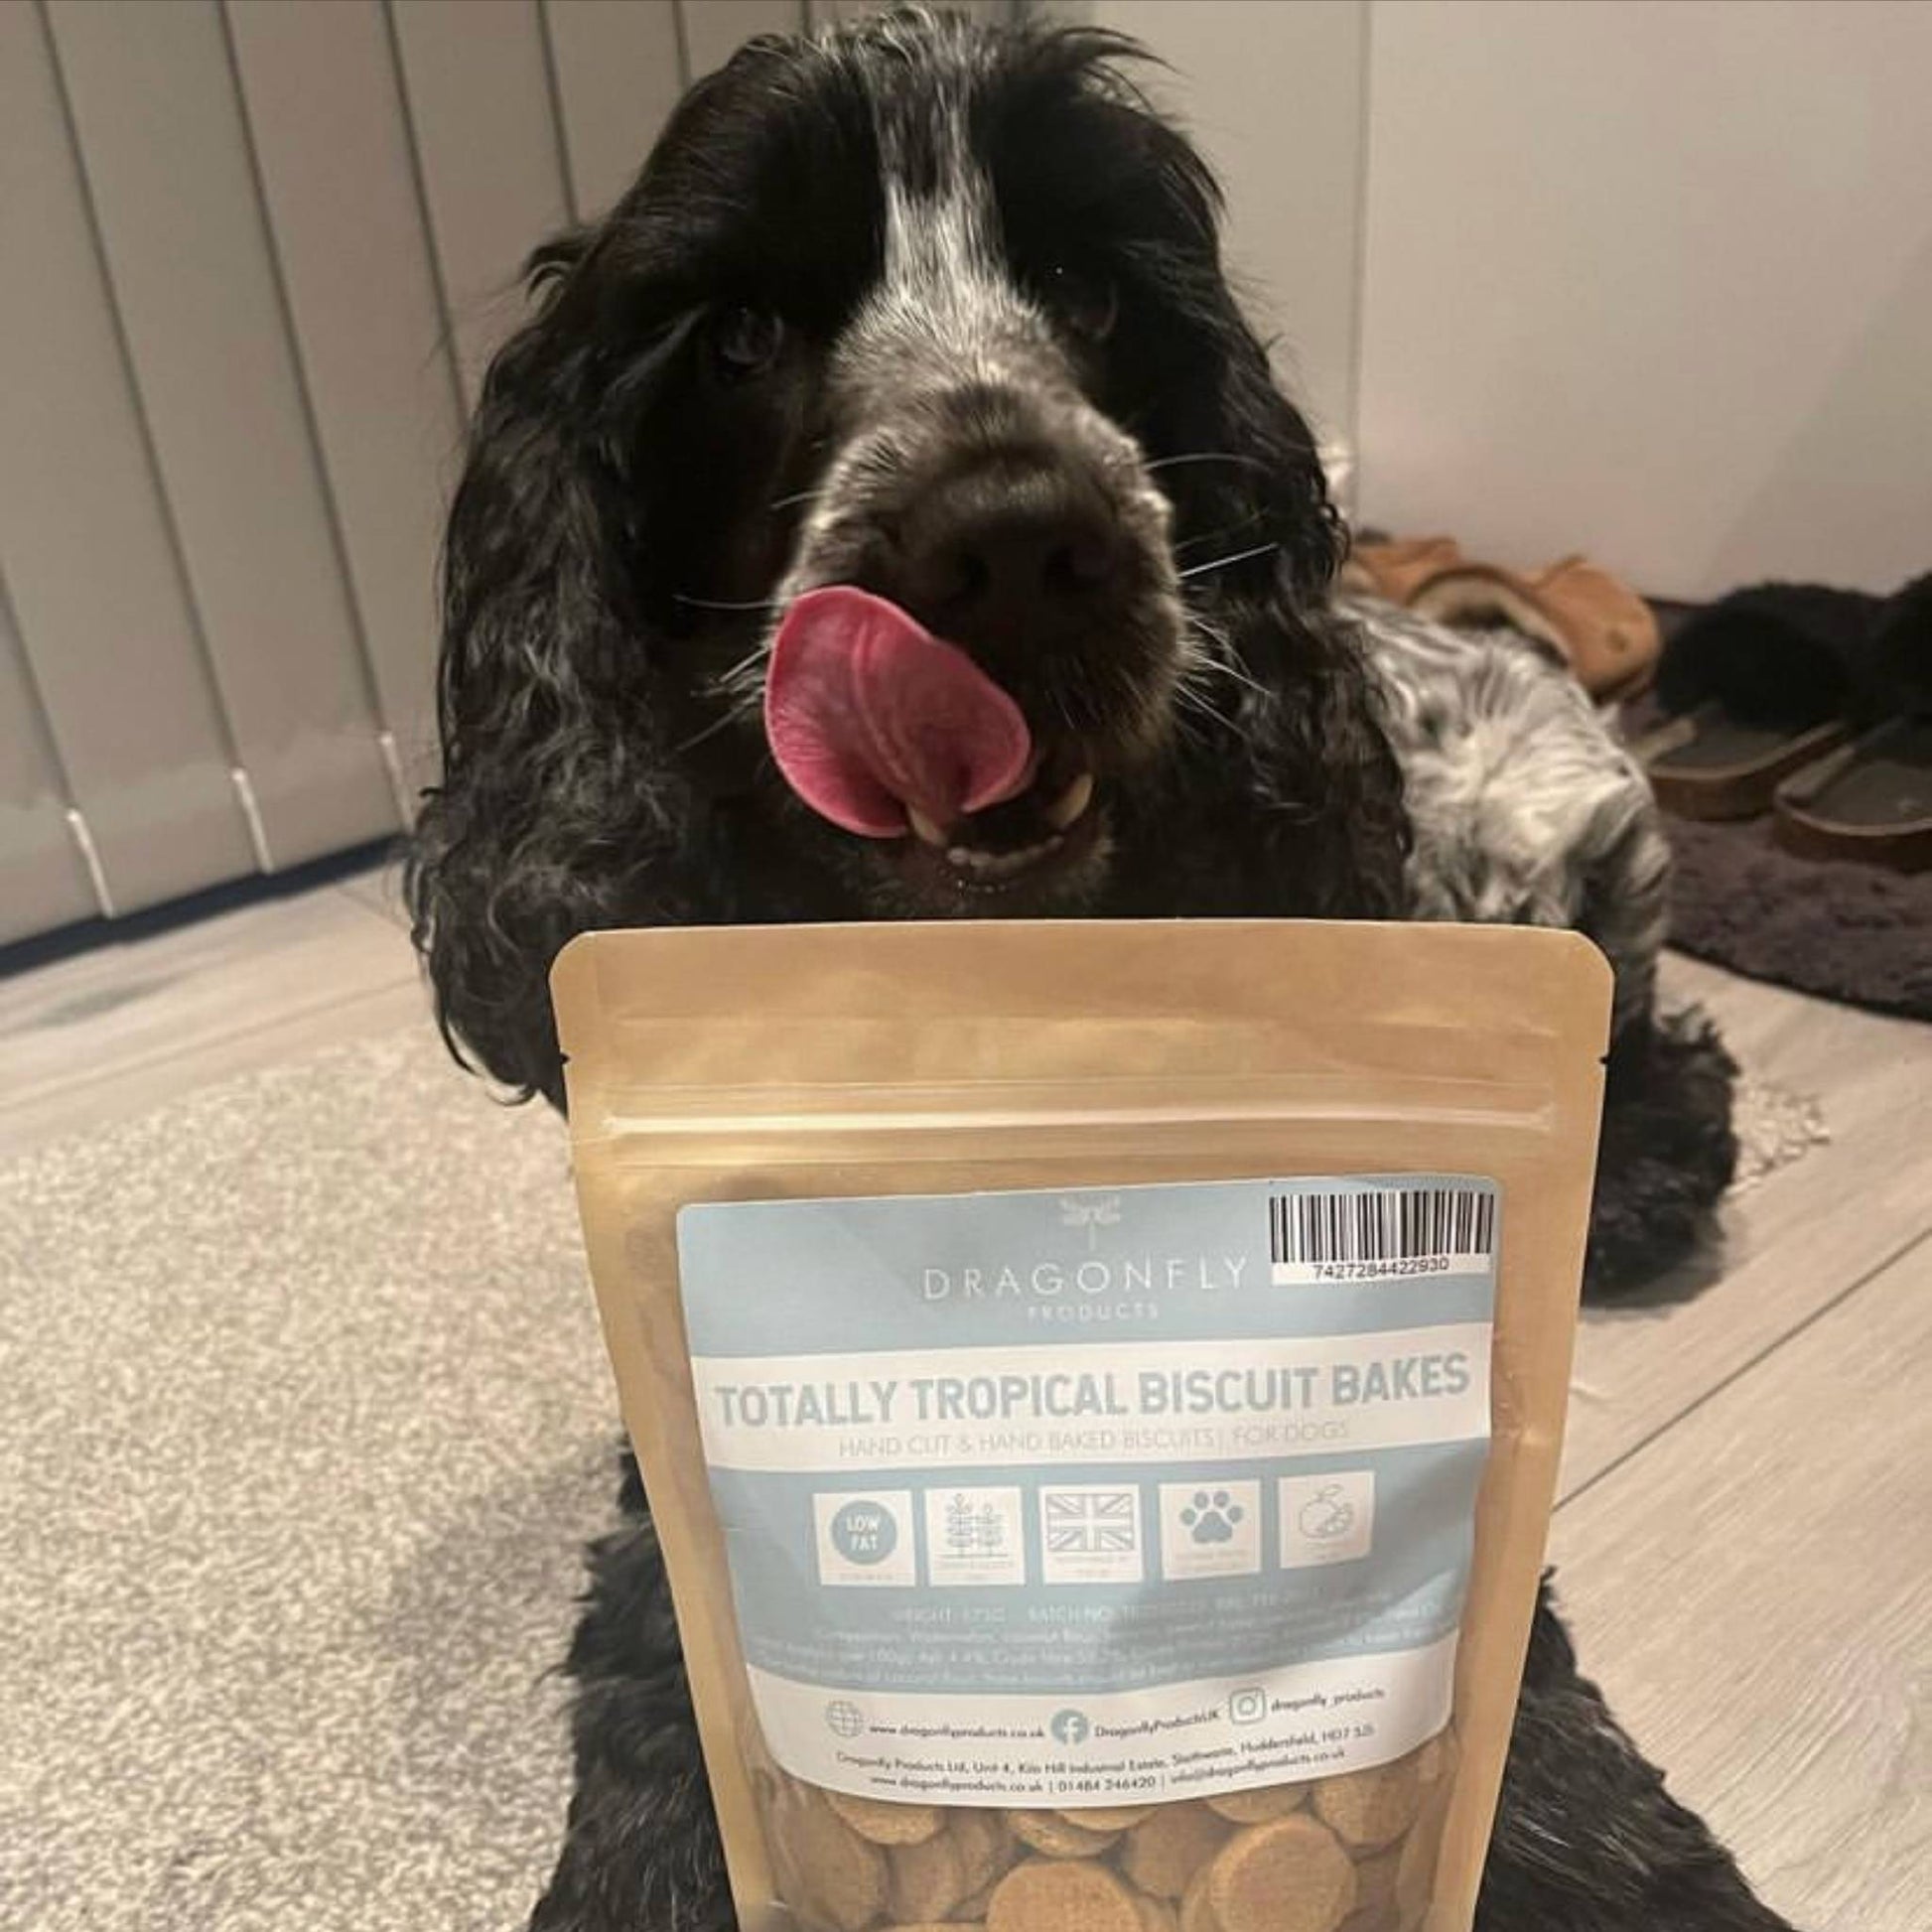 Cocker spaniel with tropical dog biscuit